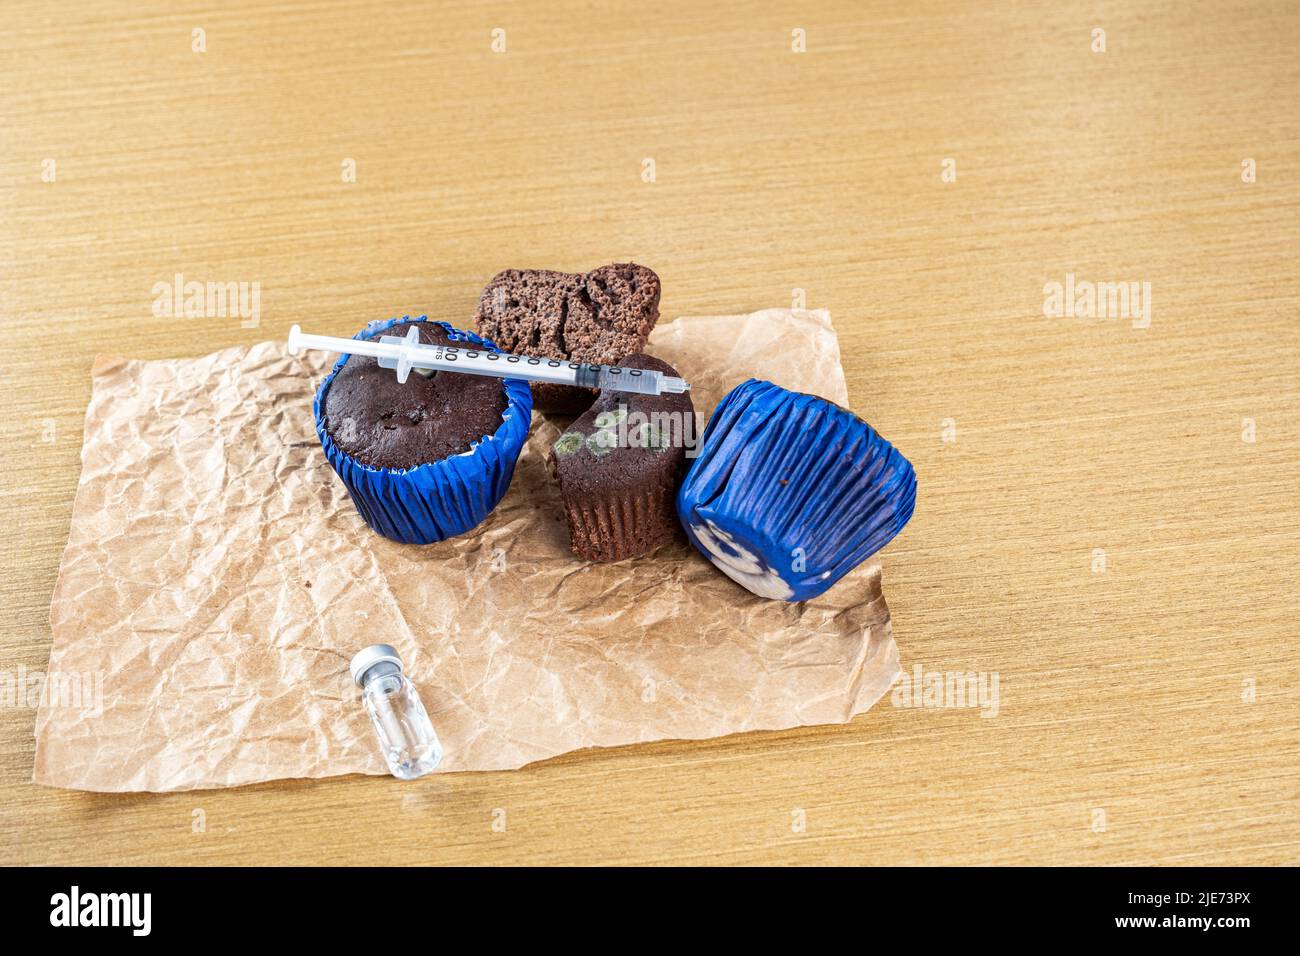 Syringe with insulin over several moldy muffins. Stock Photo